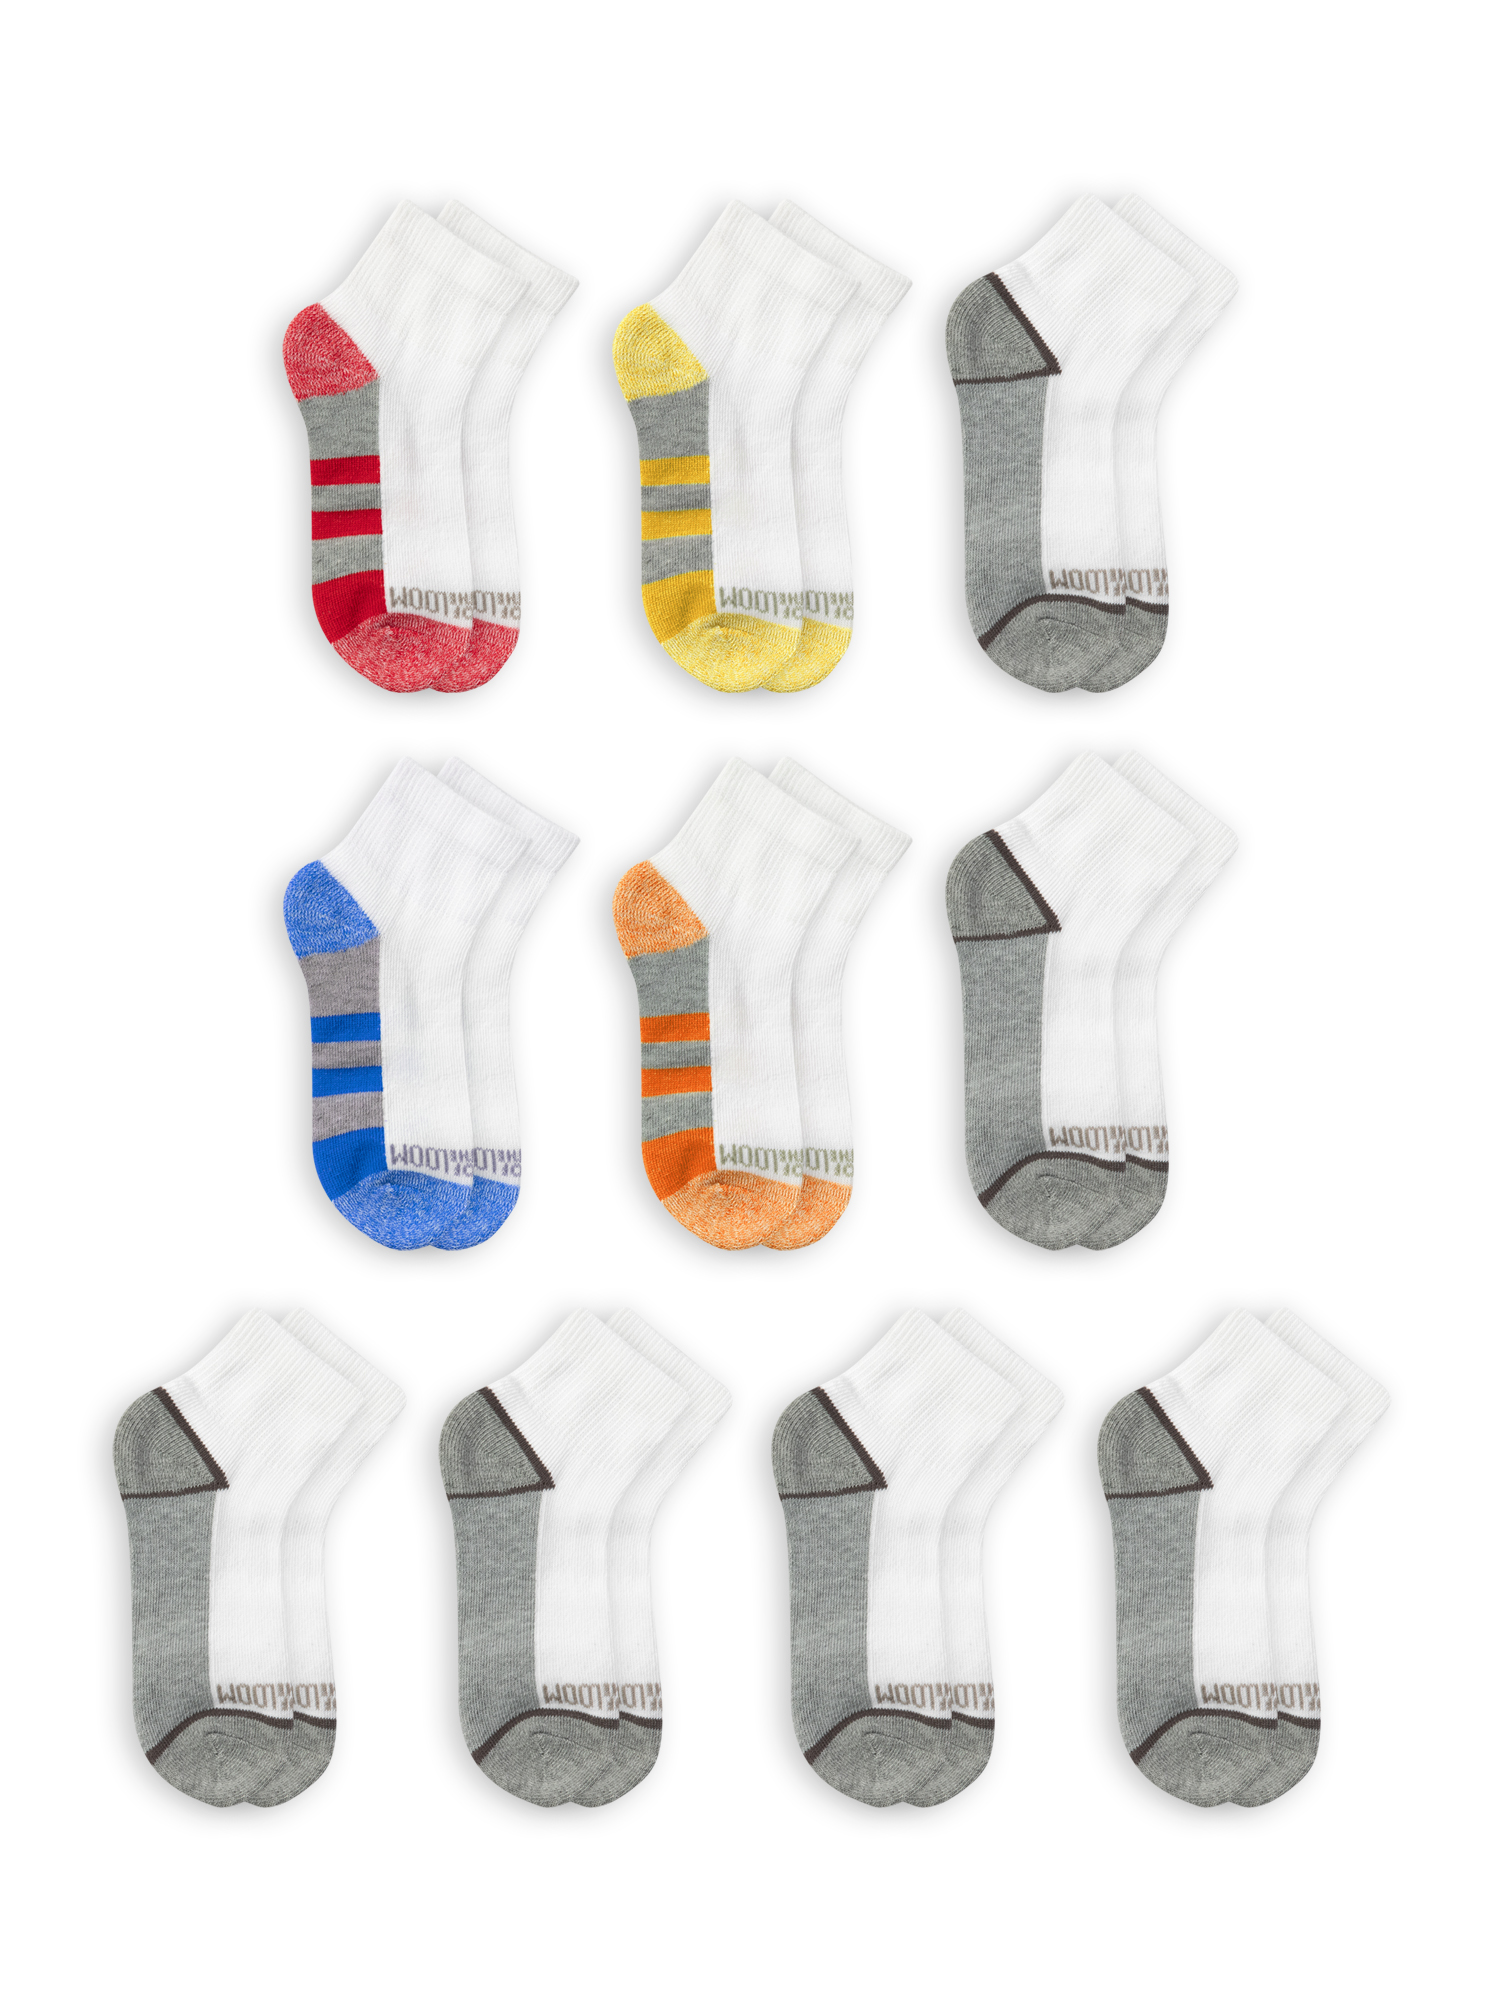 Fruit of the Loom Boys Zone Cushion Ankle Socks 10 Pack, (Little Kids & Big Kids) White Assorted, L - image 1 of 5